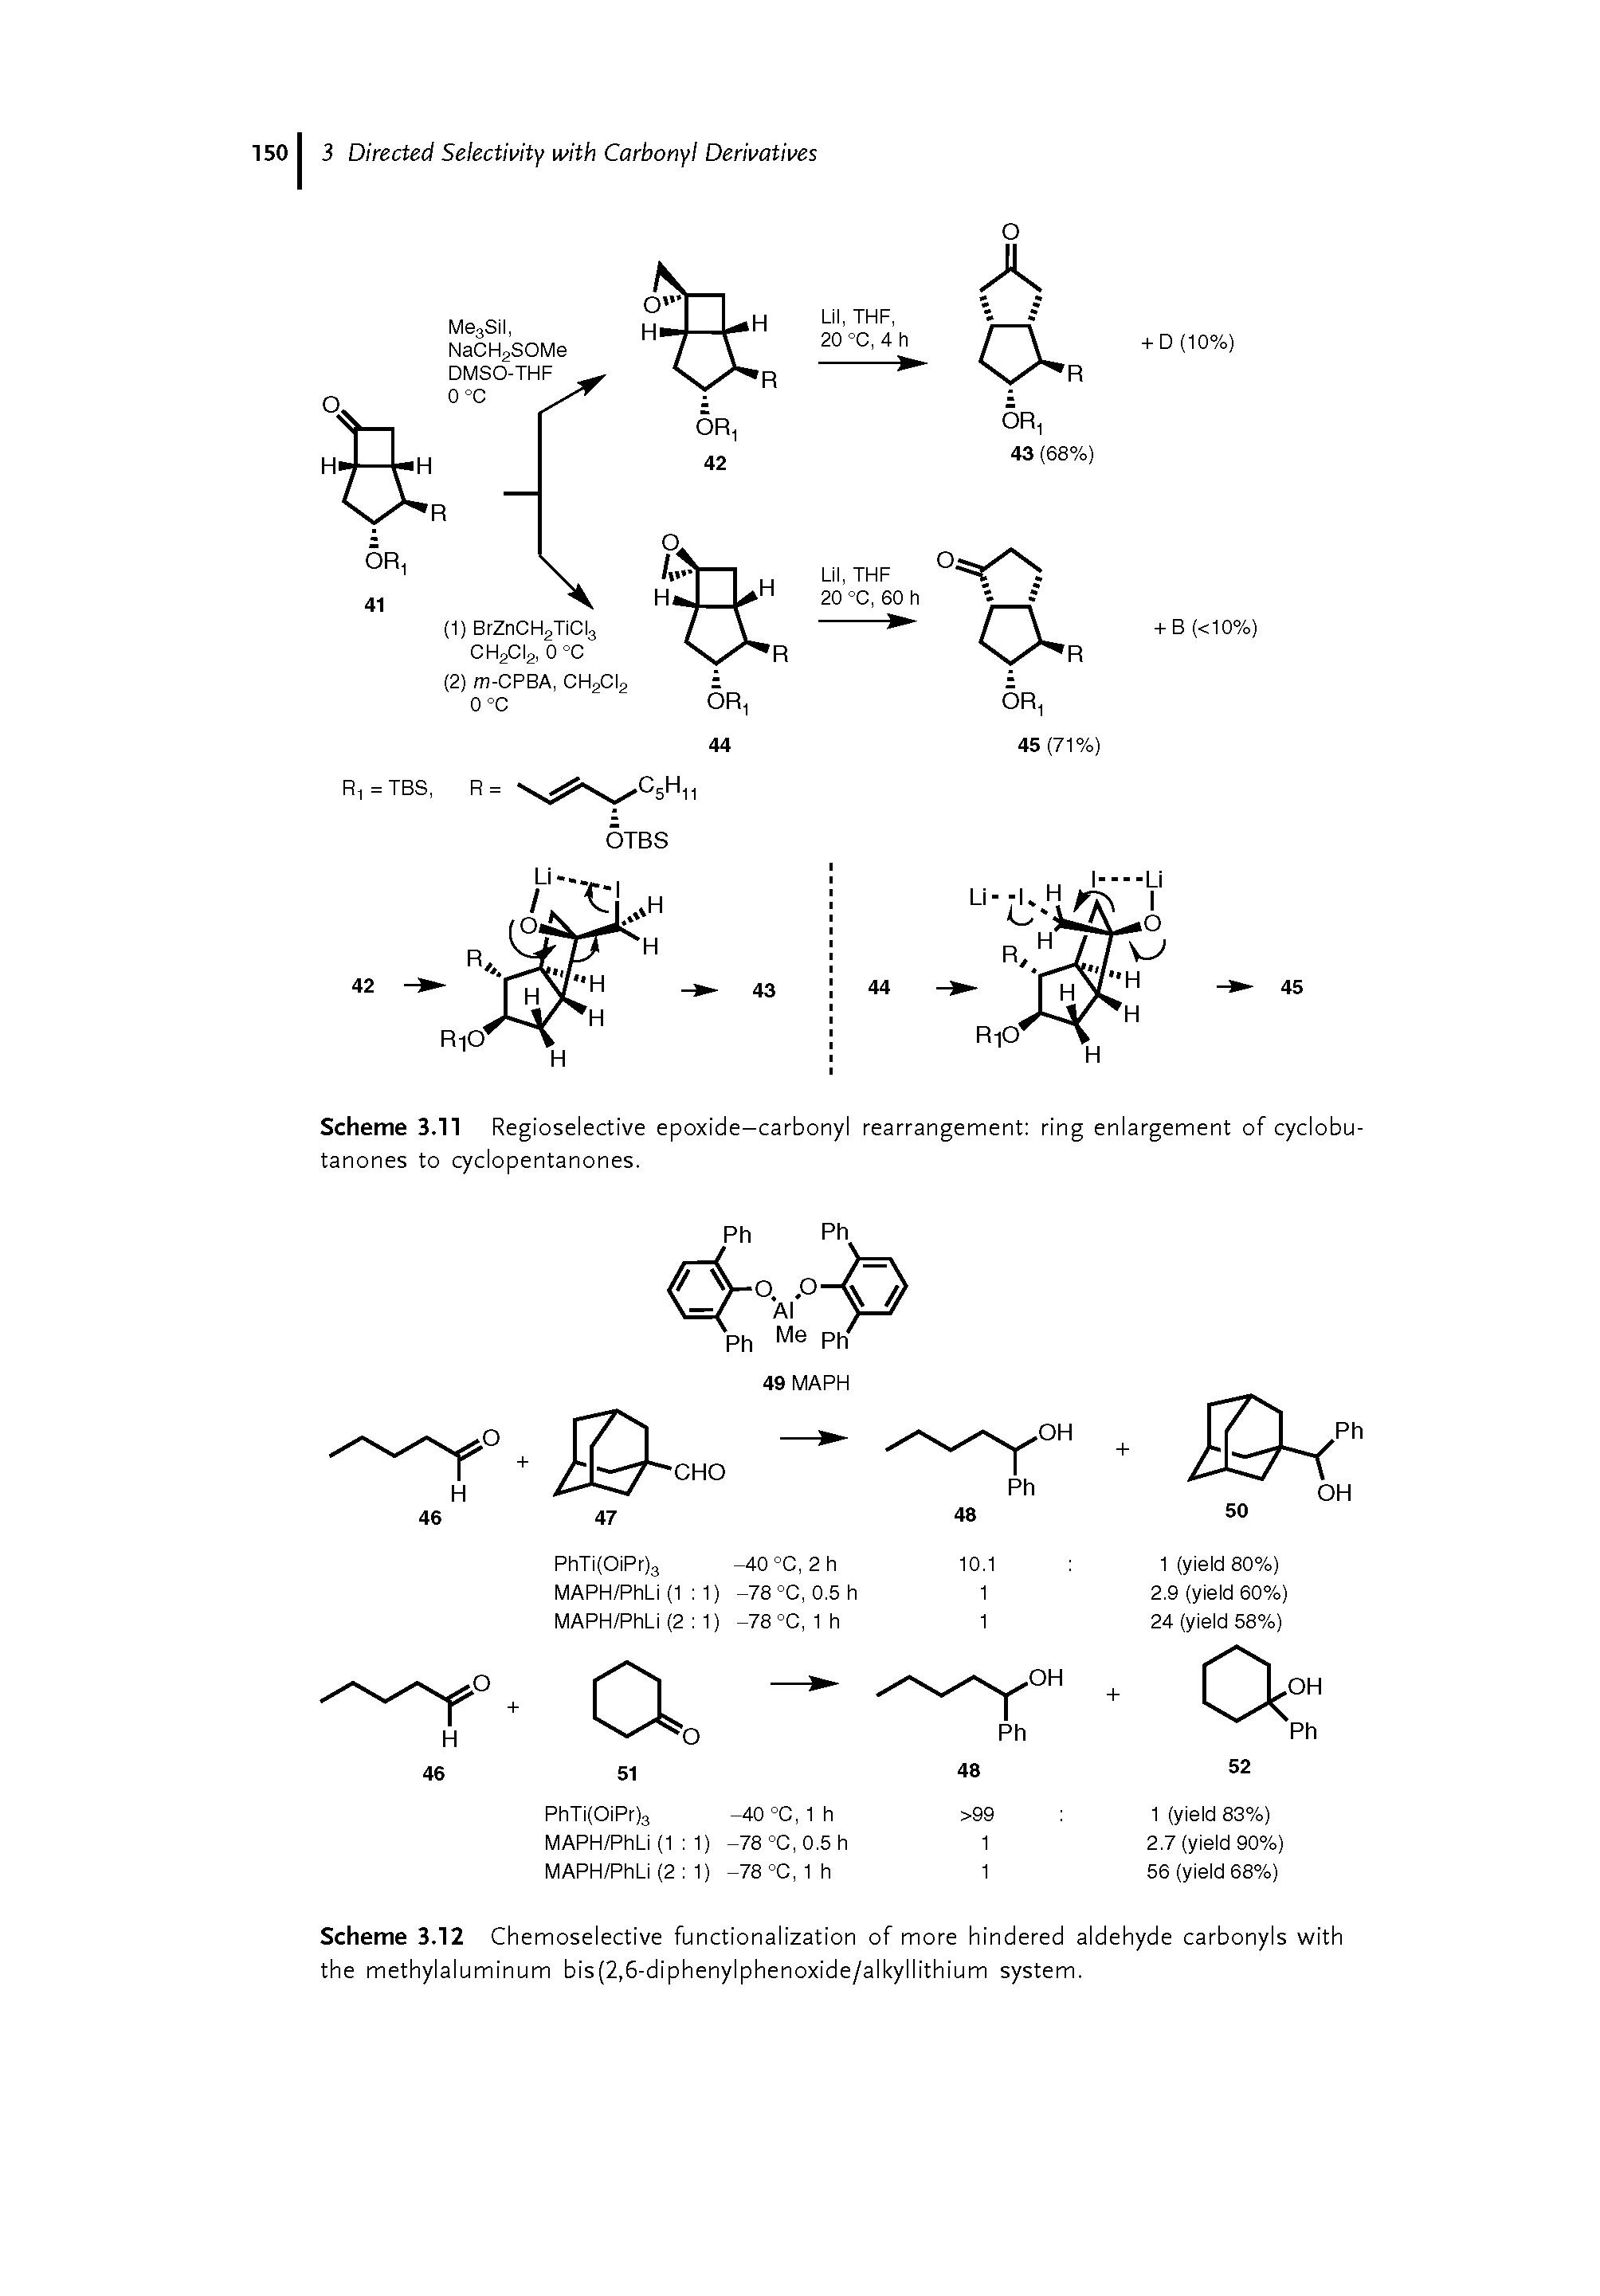 Scheme 3.12 Chemoselective functionalization of more hindered aldehyde carbonyls with the methylaluminum bis(2,6-diphenylphenoxide/alkyllithium system.